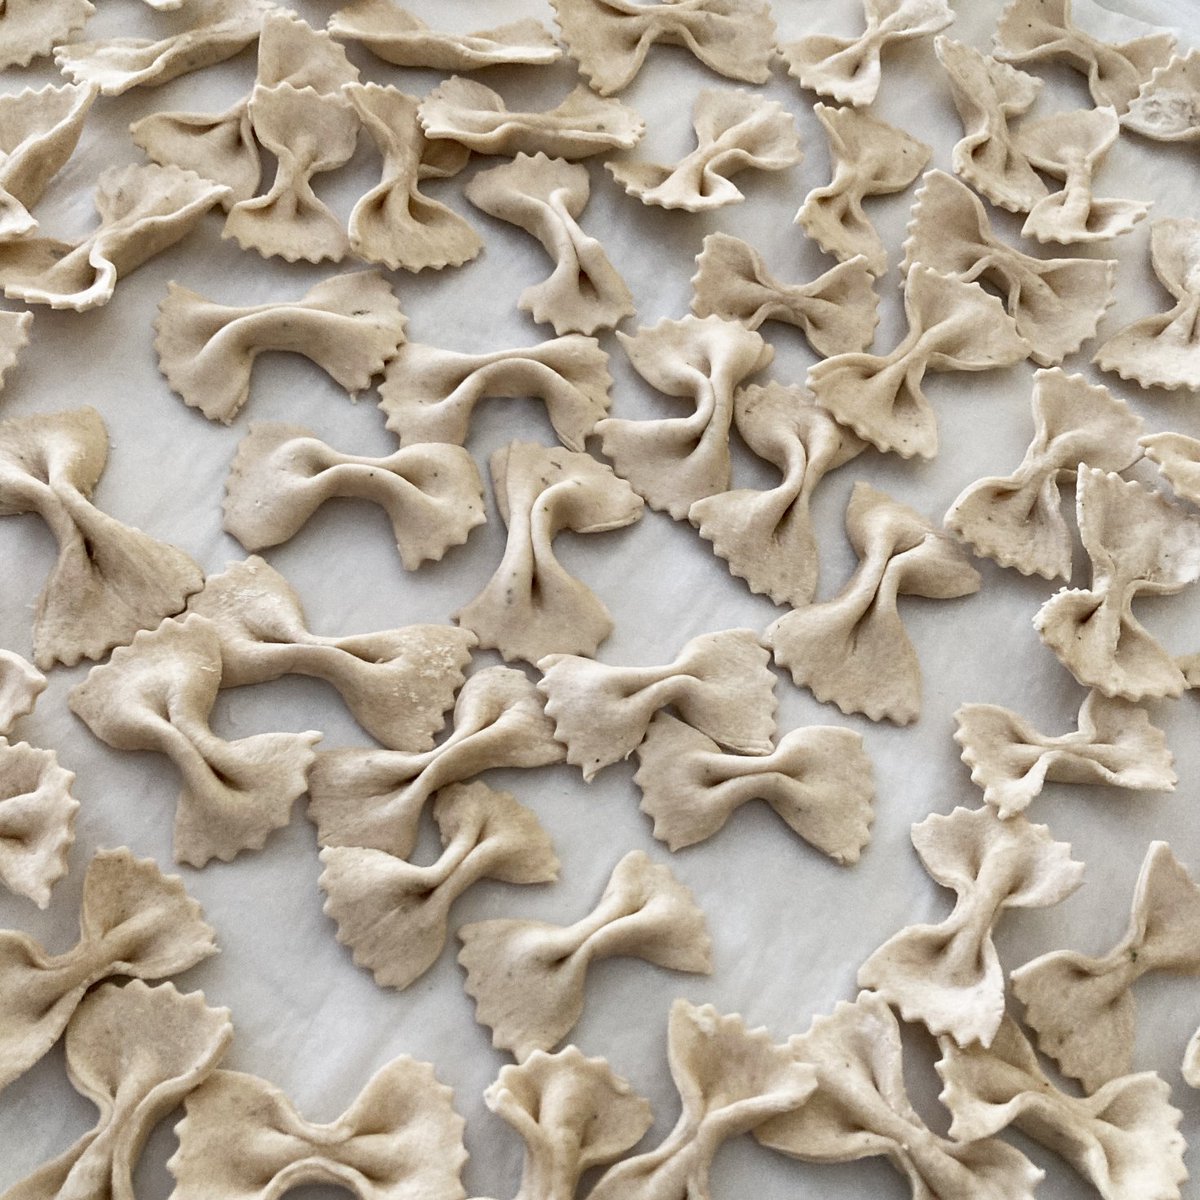 Tuscan herb infused homemade farfalle. Made a bit thicker than usual because I'm shipping it and don't want too much breakage along the way. You can tell I was getting tired by this 5th tray because some of them are a bit wonky. 🧑‍🍳 #Italian #Cooking #Pasta